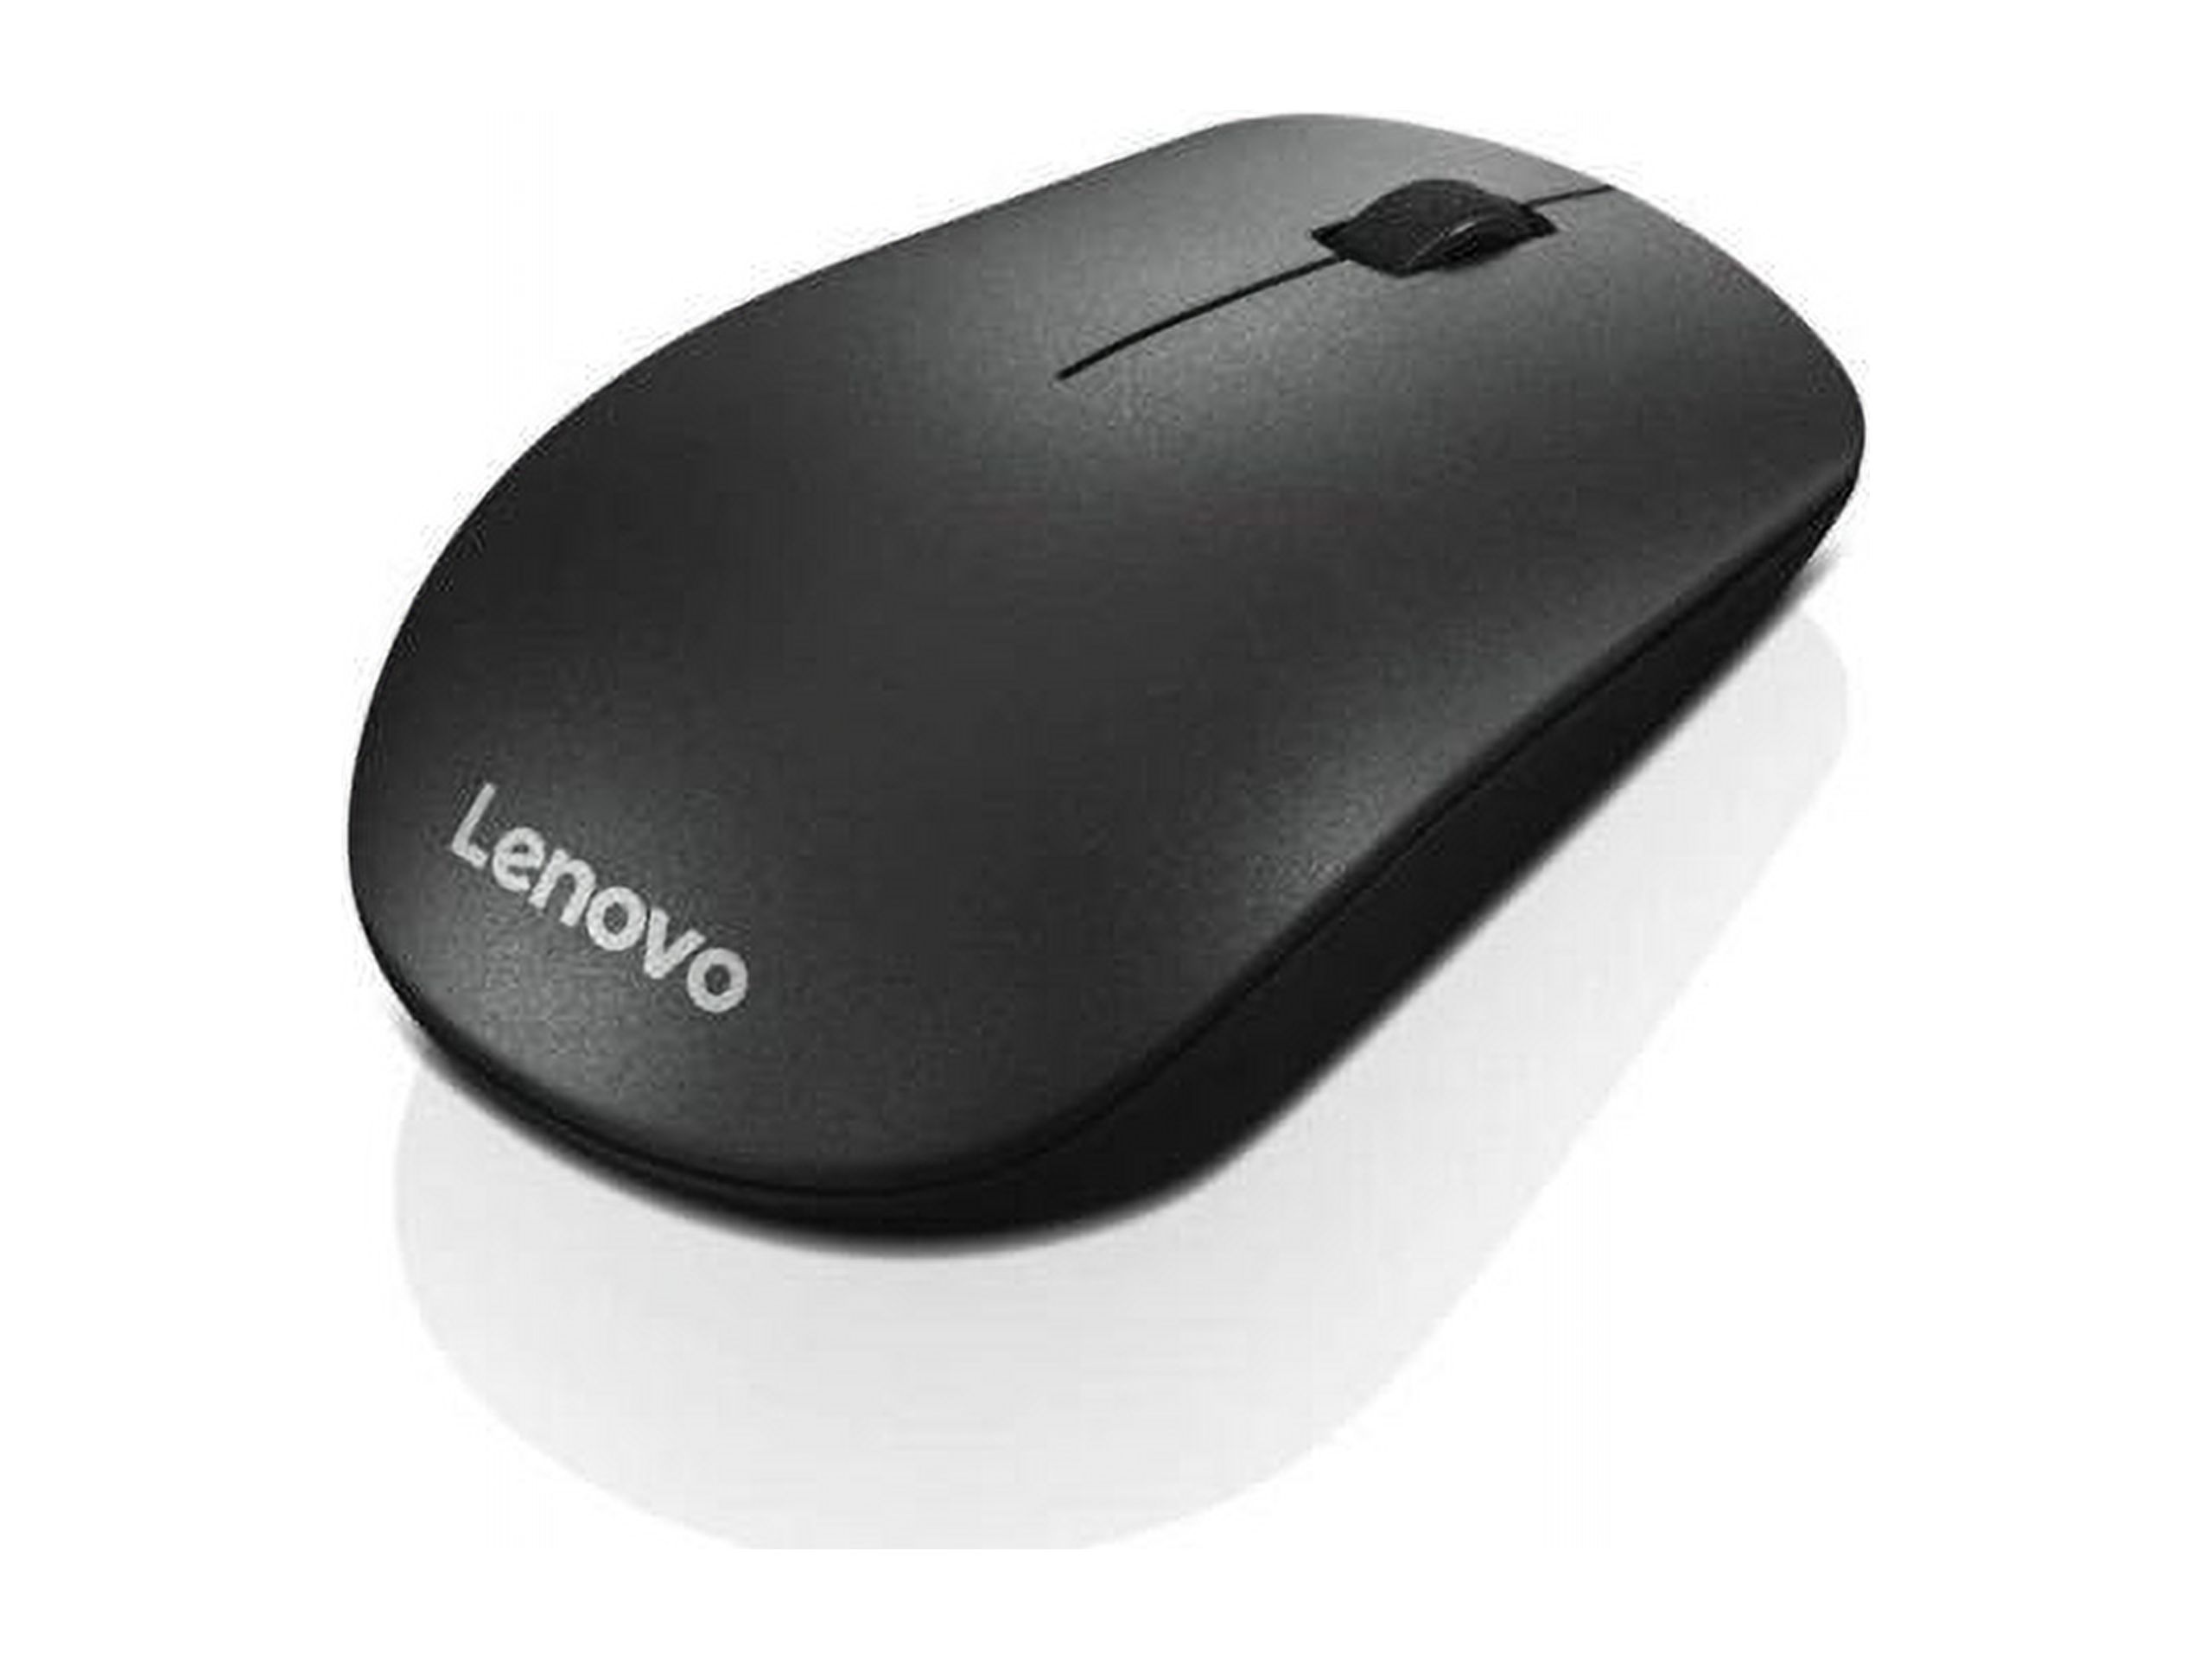 Lenovo Essential Compact Wireless Mouse, GB - image 4 of 17